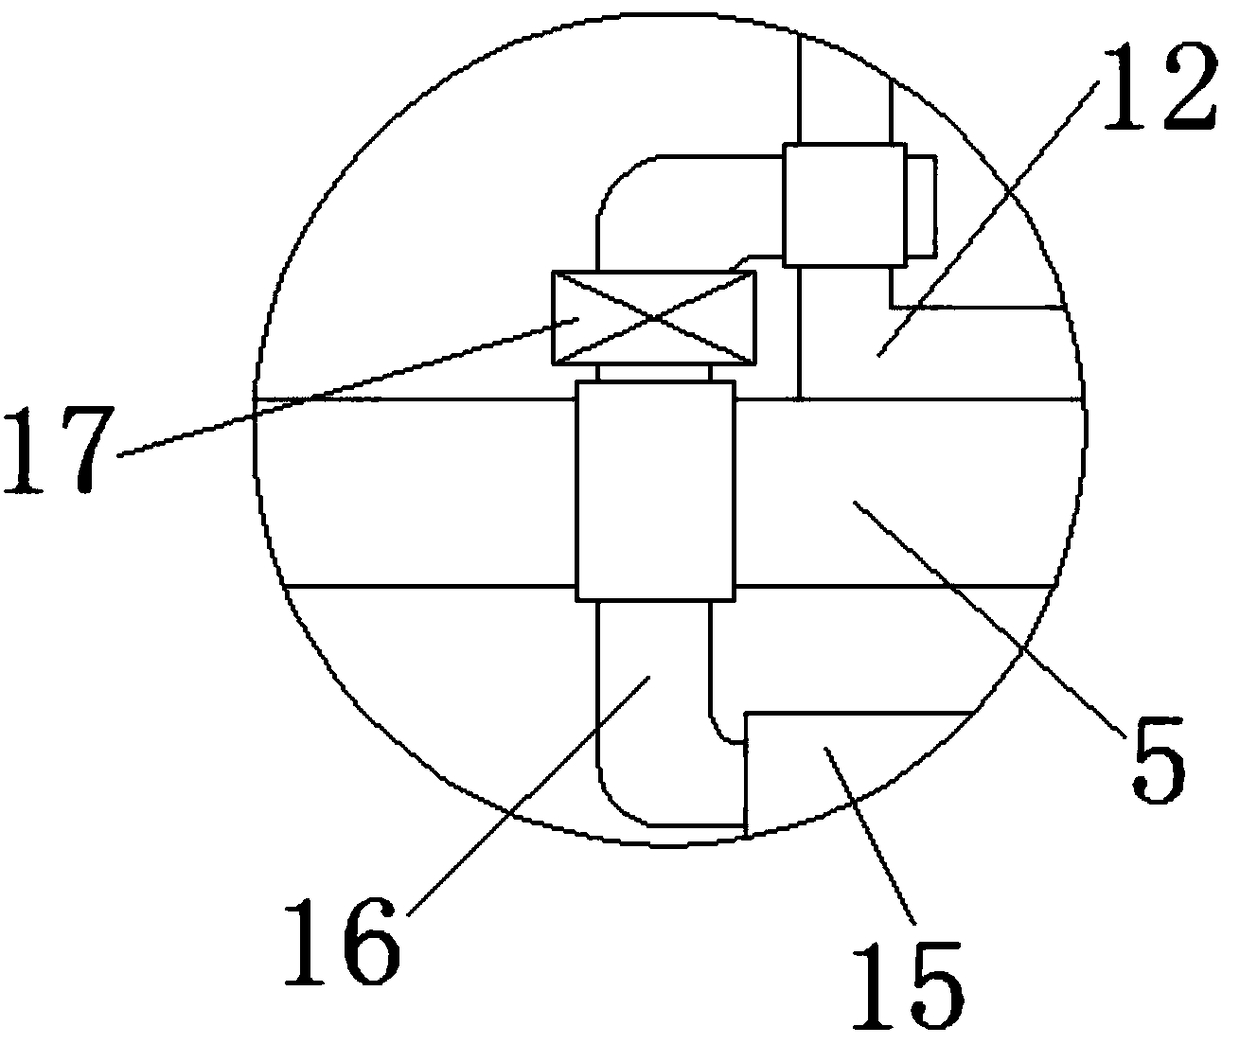 Double-shaft blending device used for selenium-rich rice processing